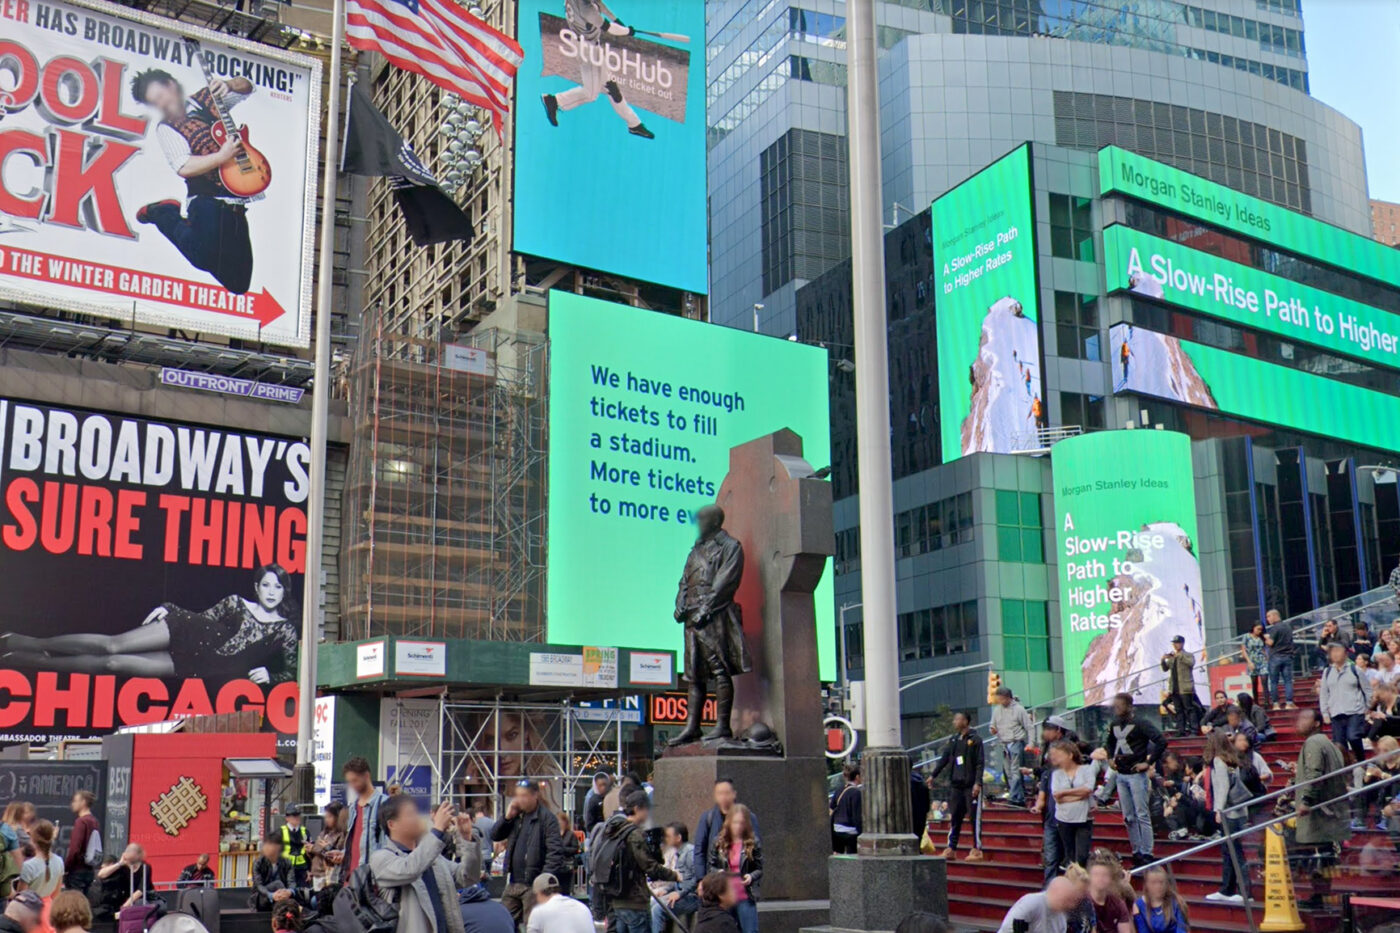 4. Father Duffy. Times Square, New York, New York